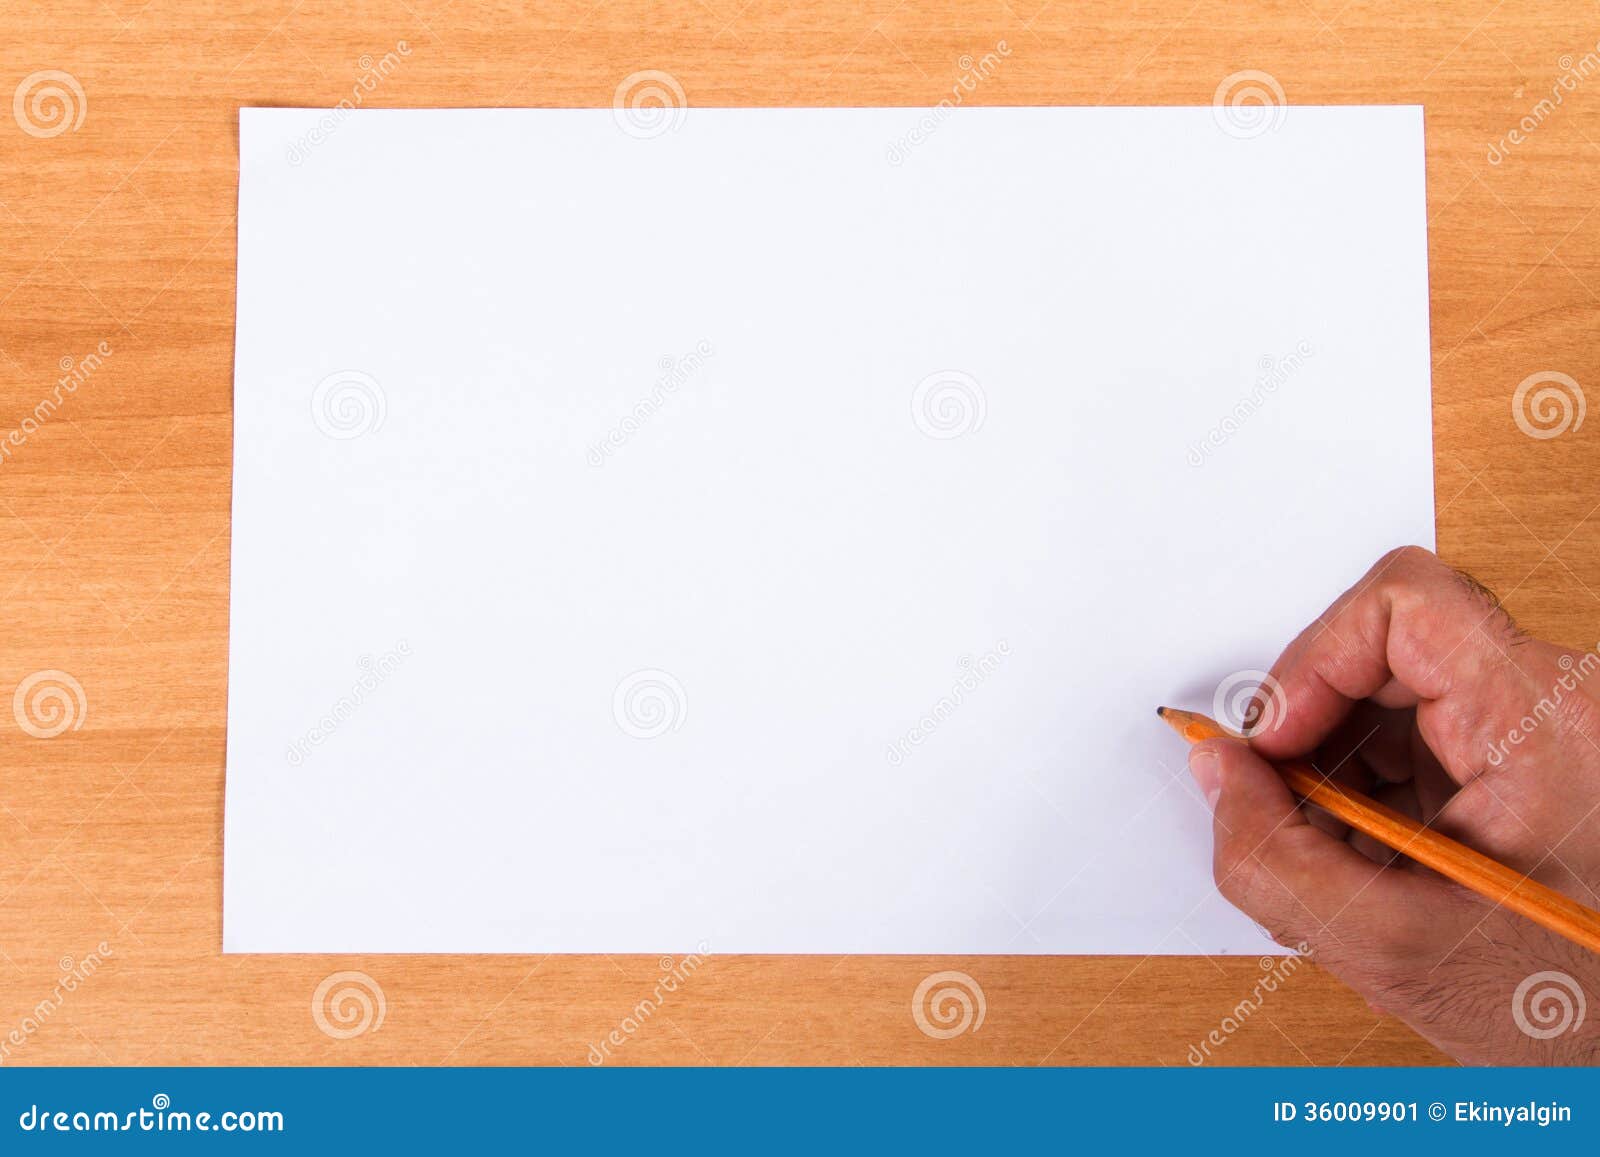 Hand Holding Pen on Paper stock image. Image of empty - 36009901